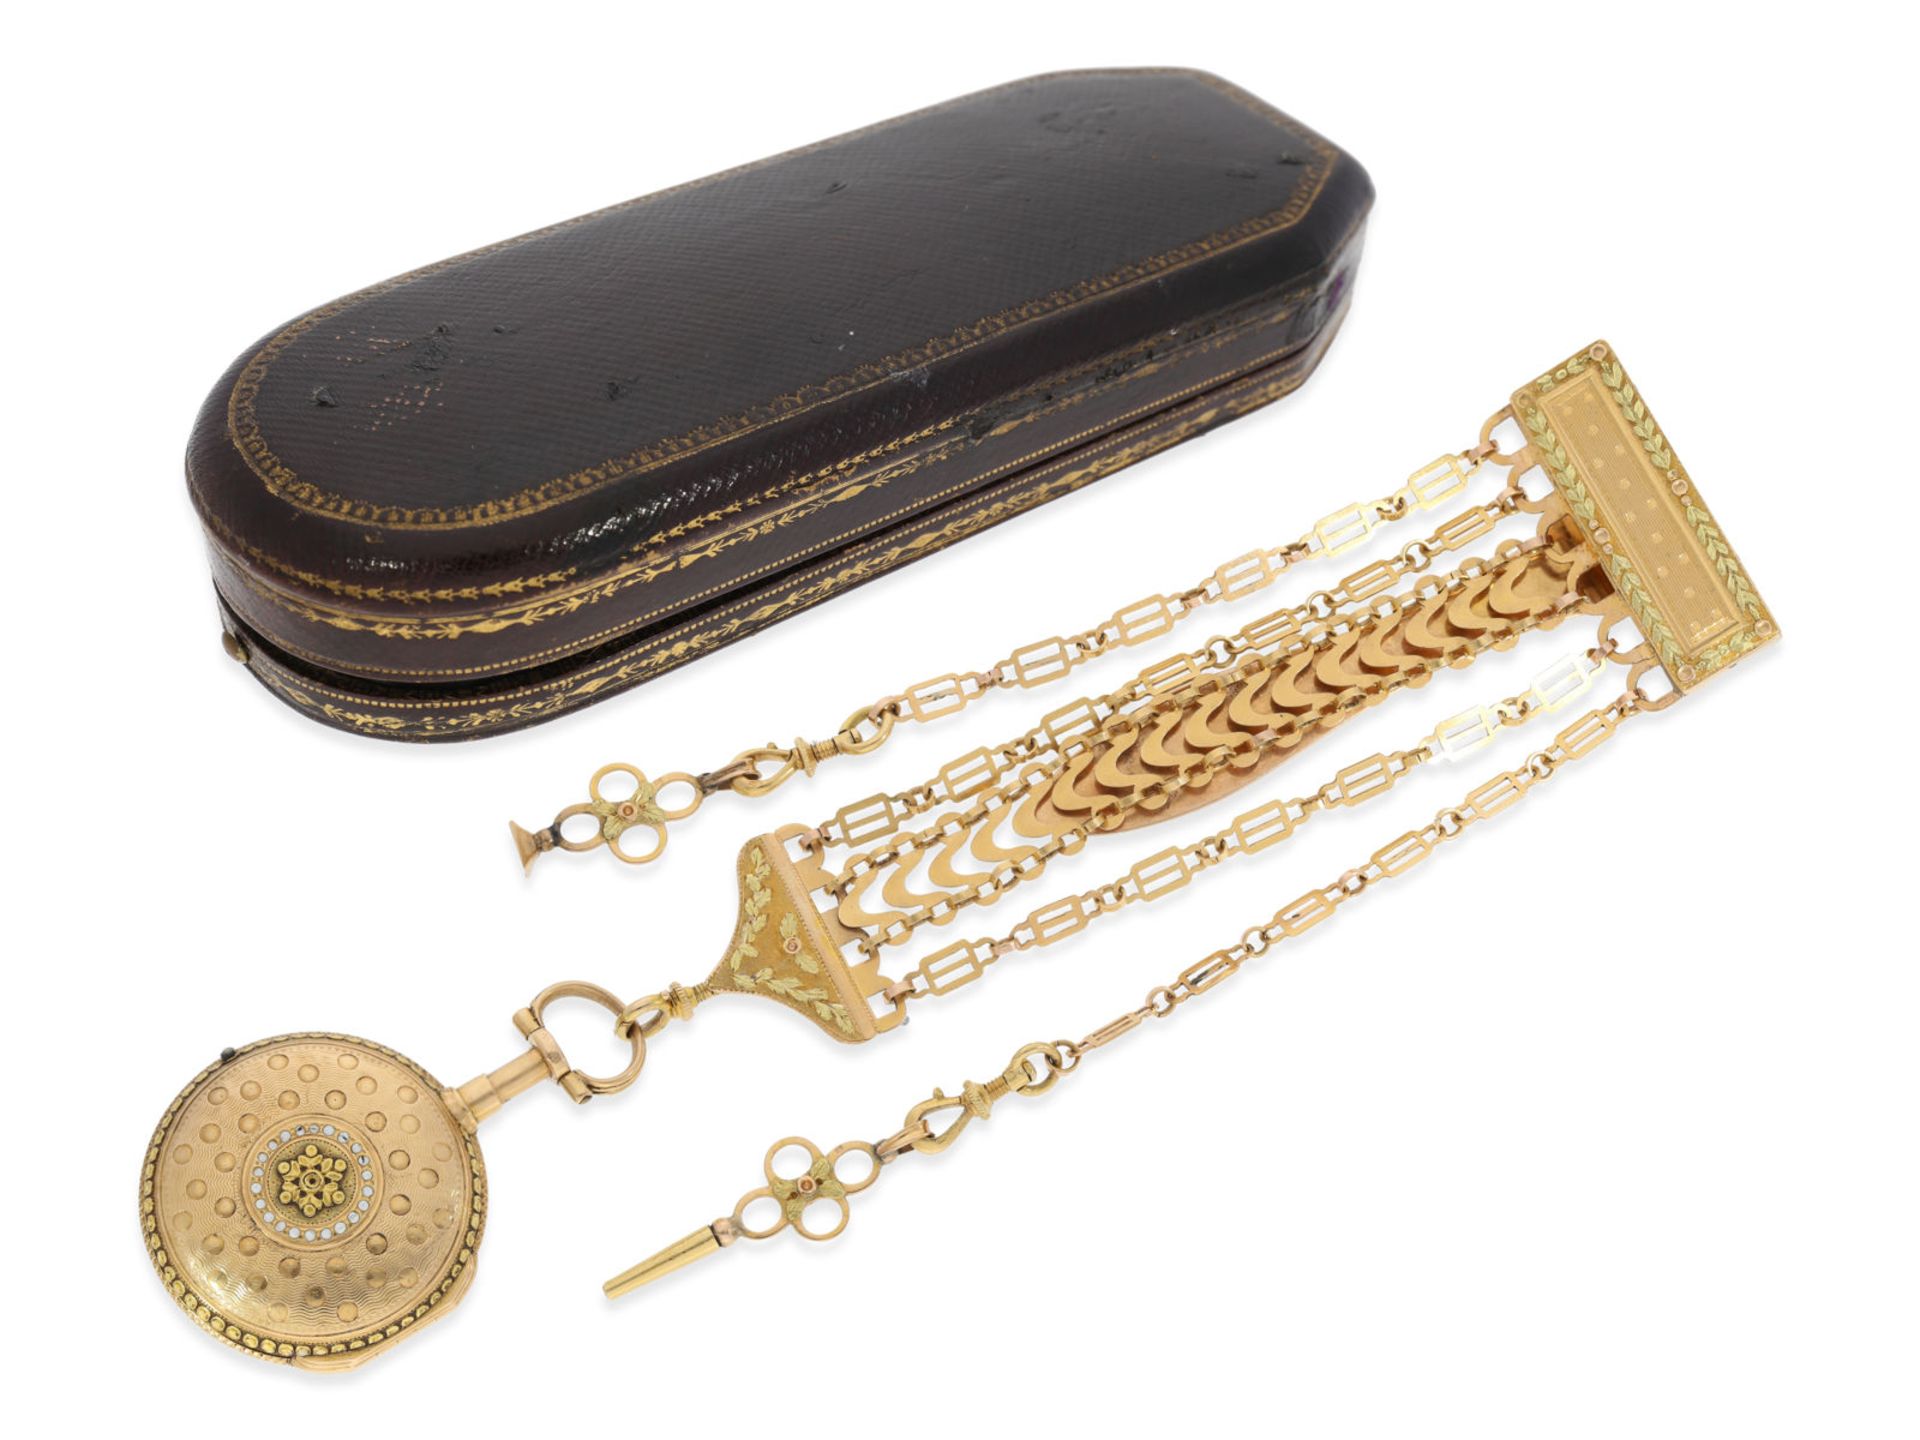 Pocket watch: gold Louis XV verge watch repeater with chatelaine and original sales box, signed Au